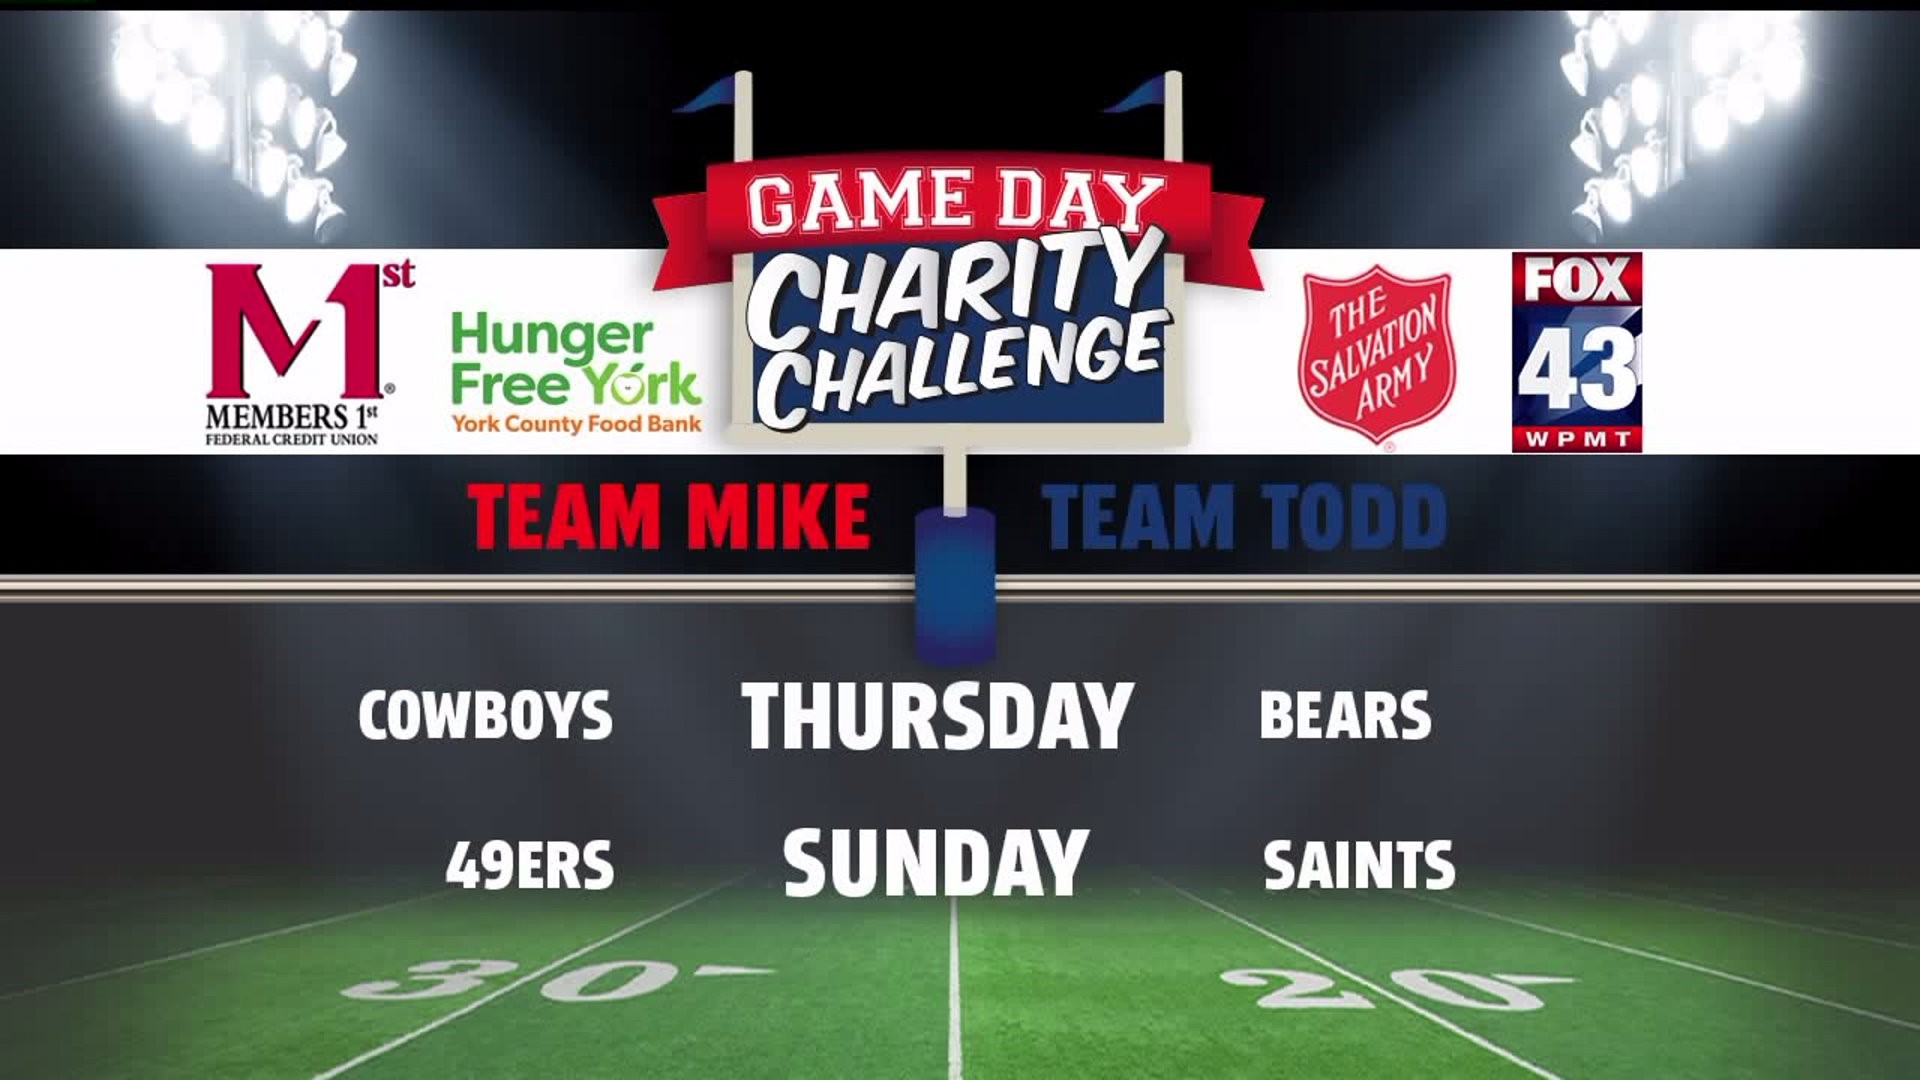 Game Day Charity Challenge (Week 11)